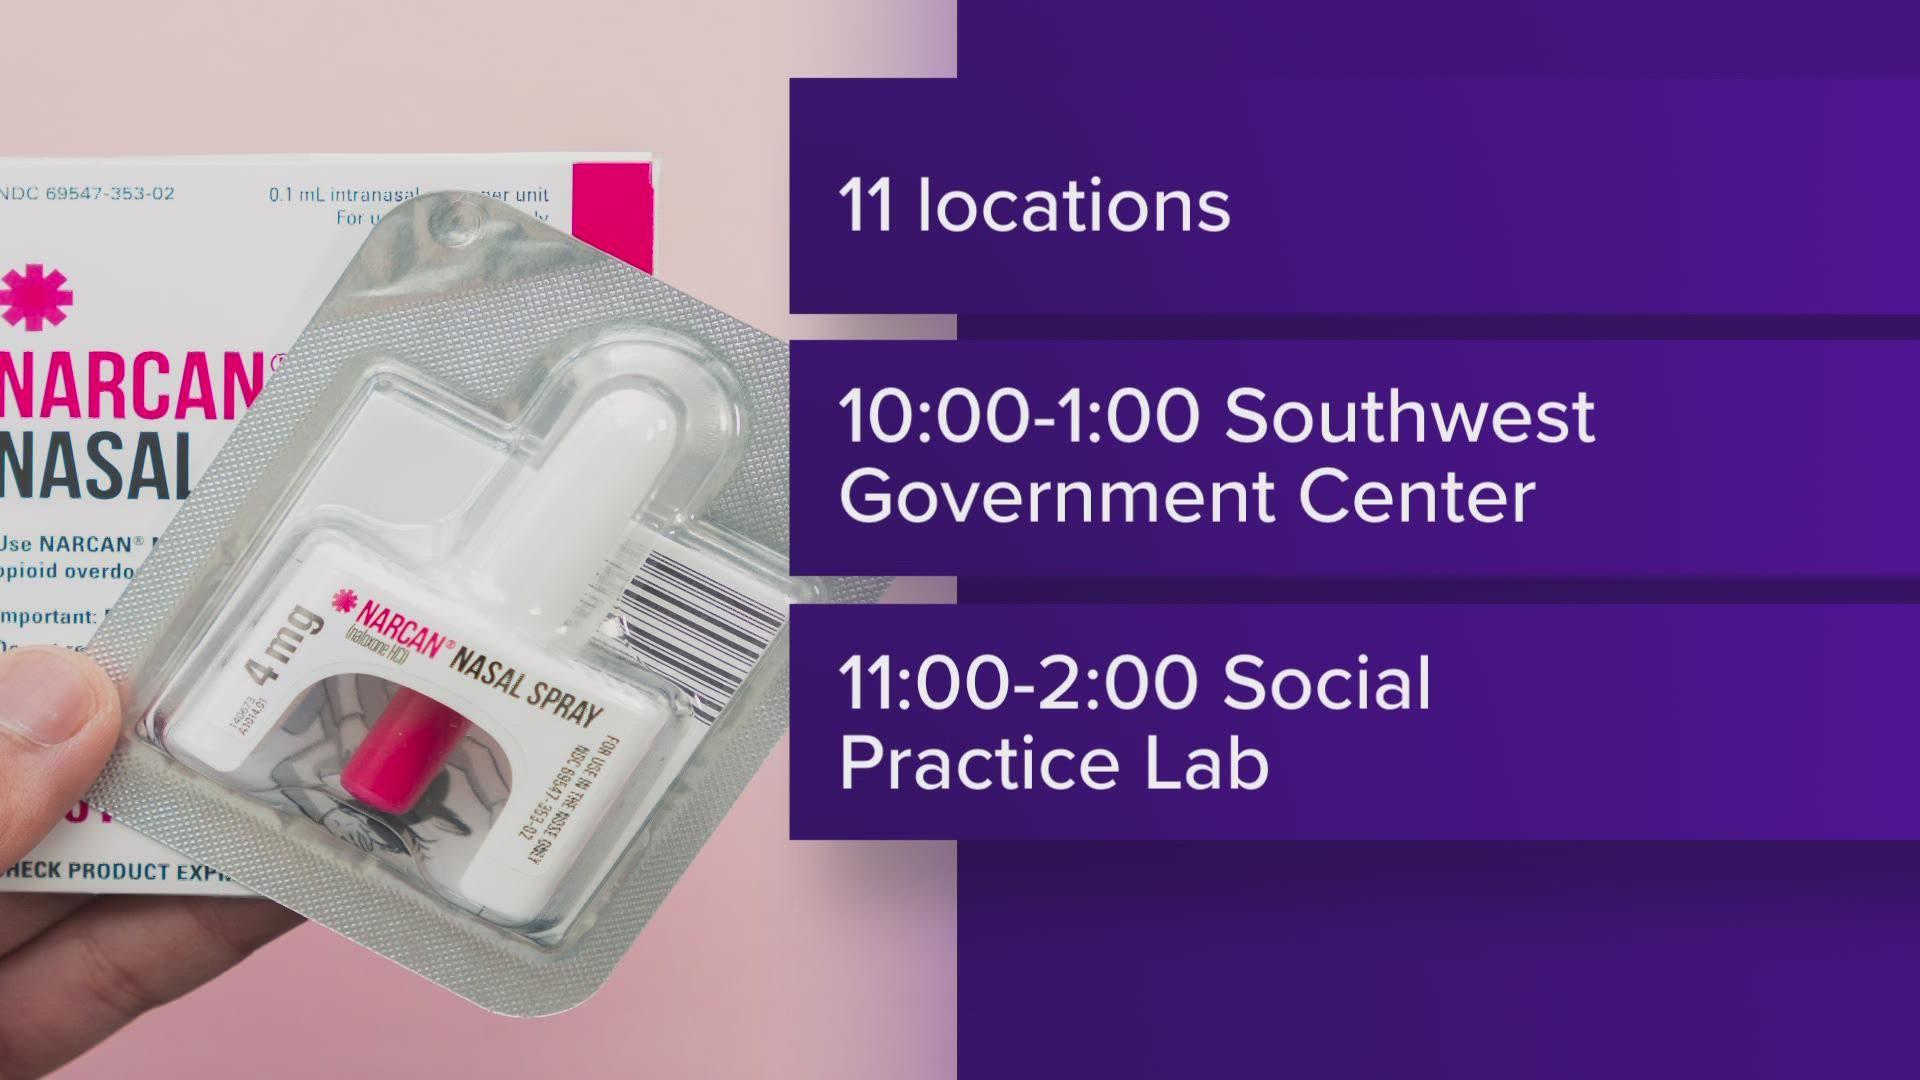 As part of the Harm Reduction Outreach Services, LMDPHW is giving out free Narcan, a drug that can prevent accidental overdoses and save lives.